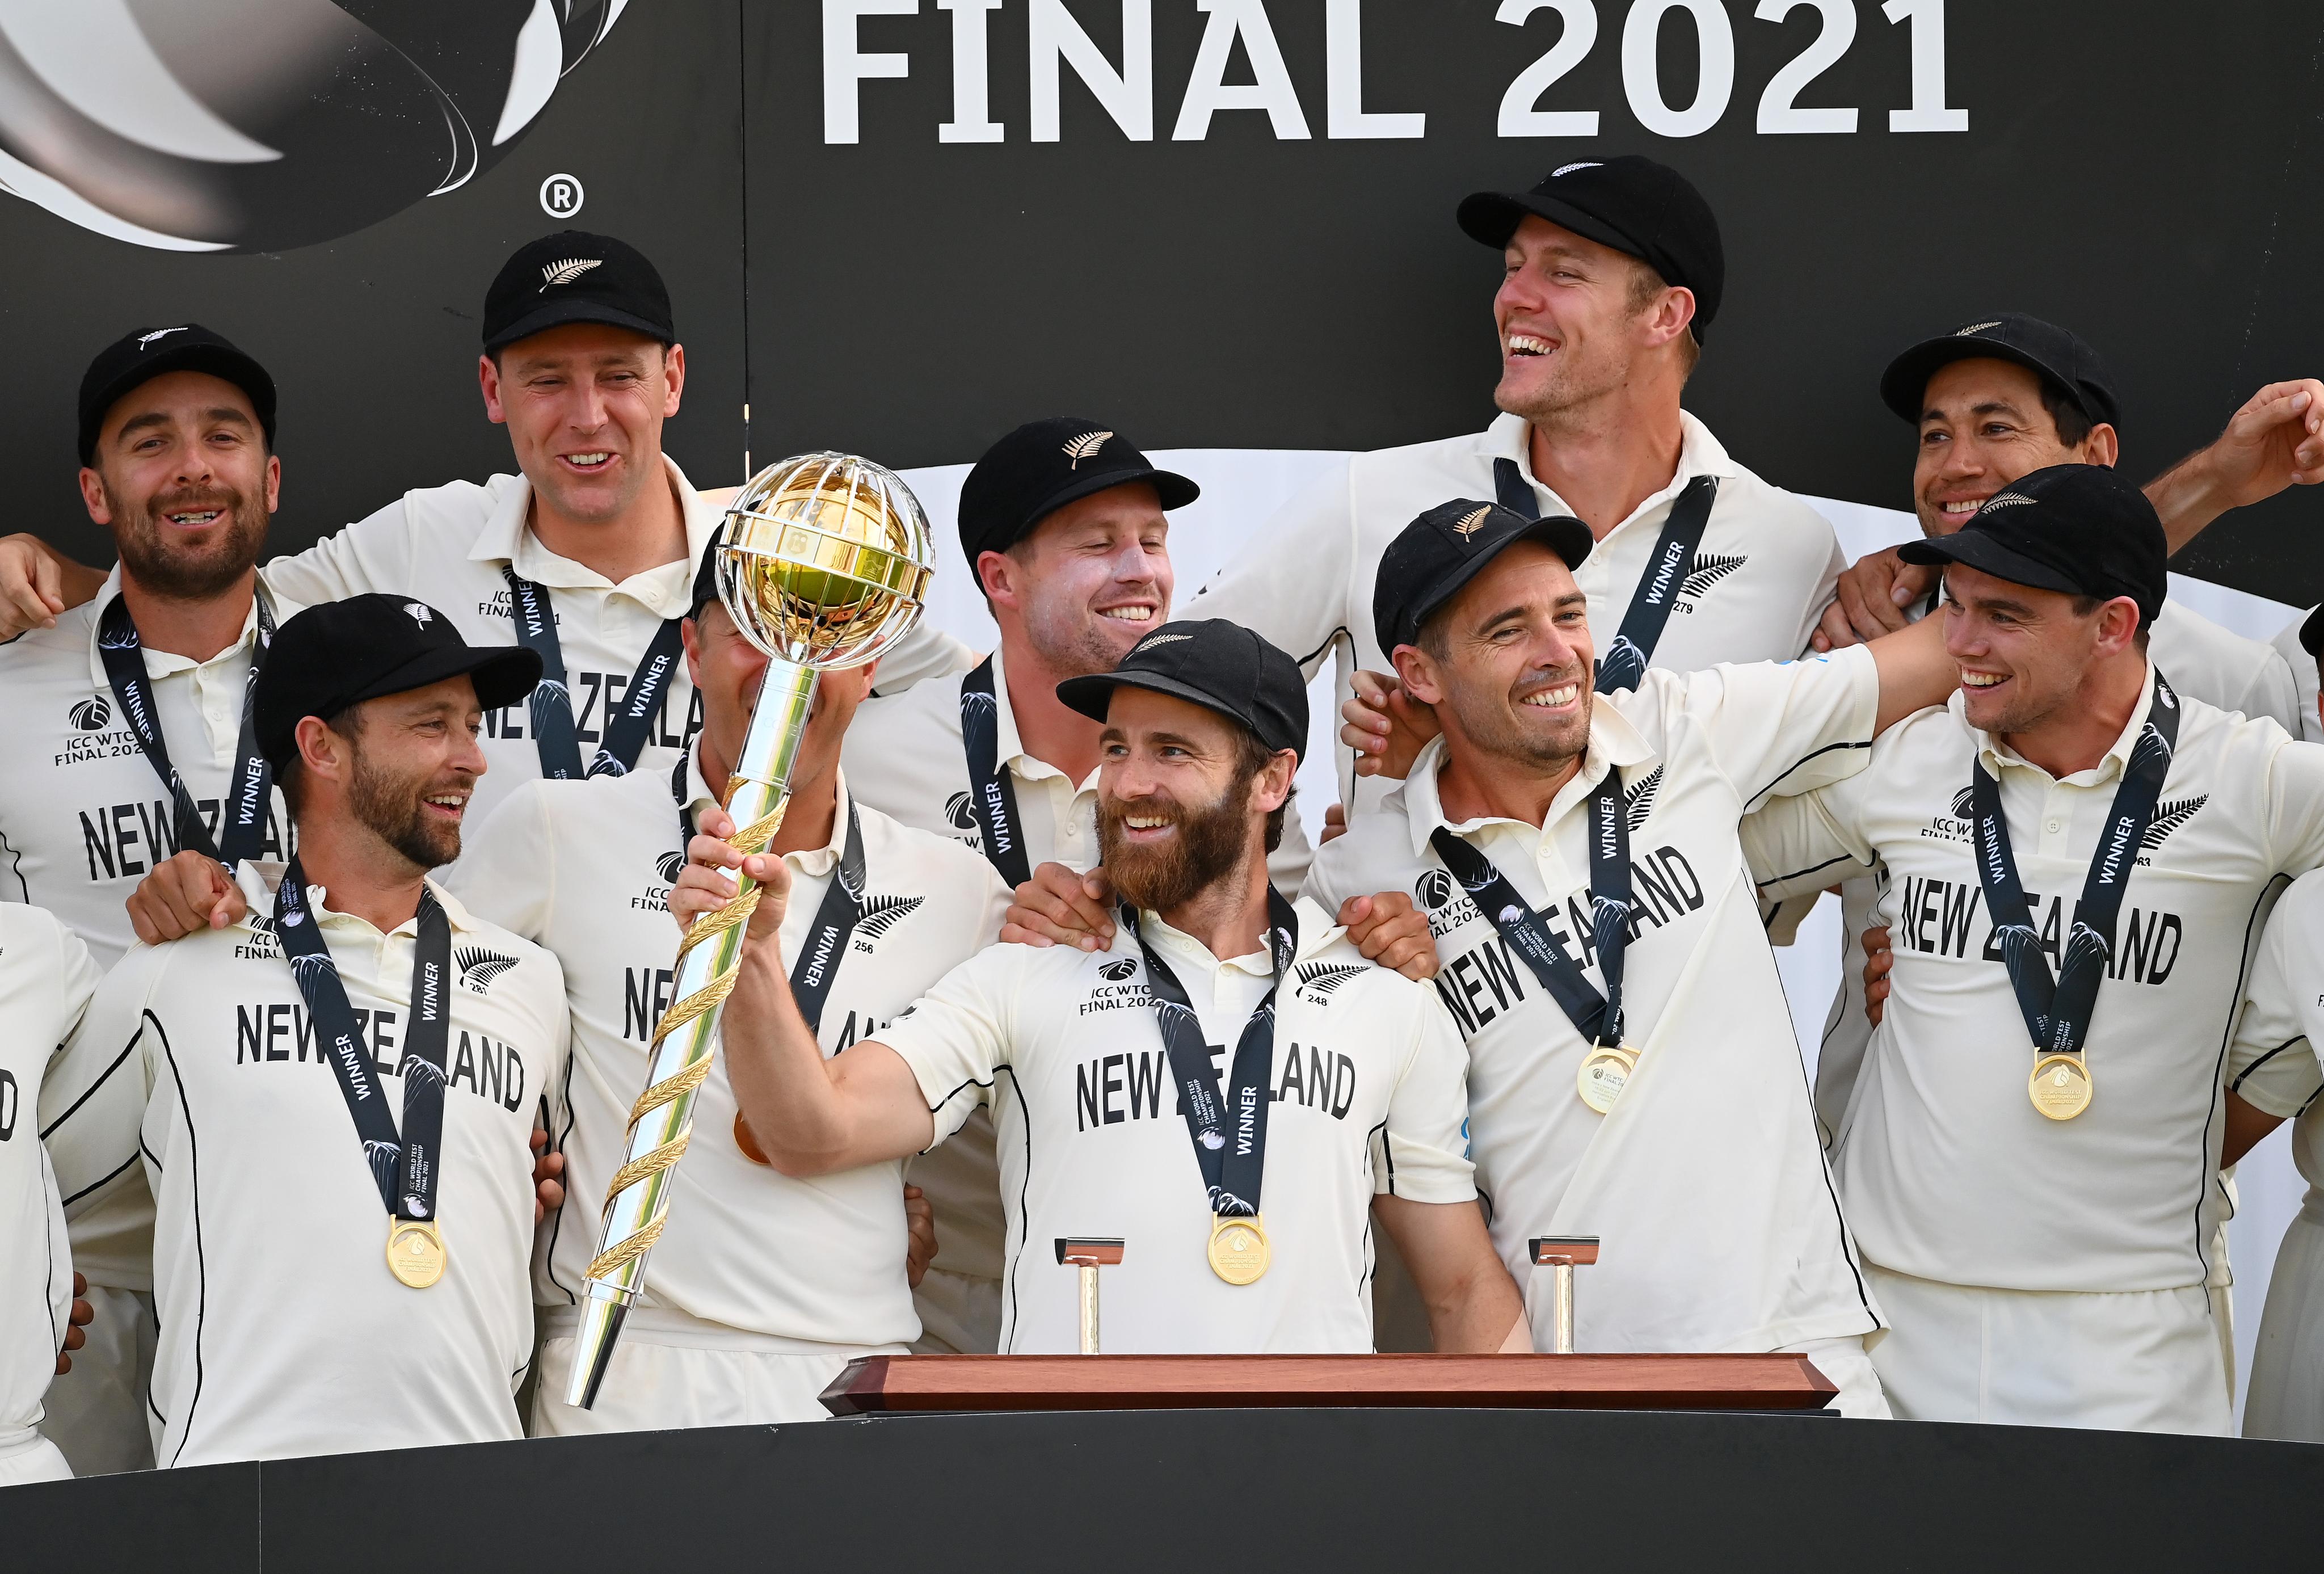 WTC Final | Special feeling to walk away with an ICC title on a sporting surface, admits Kane Williamson